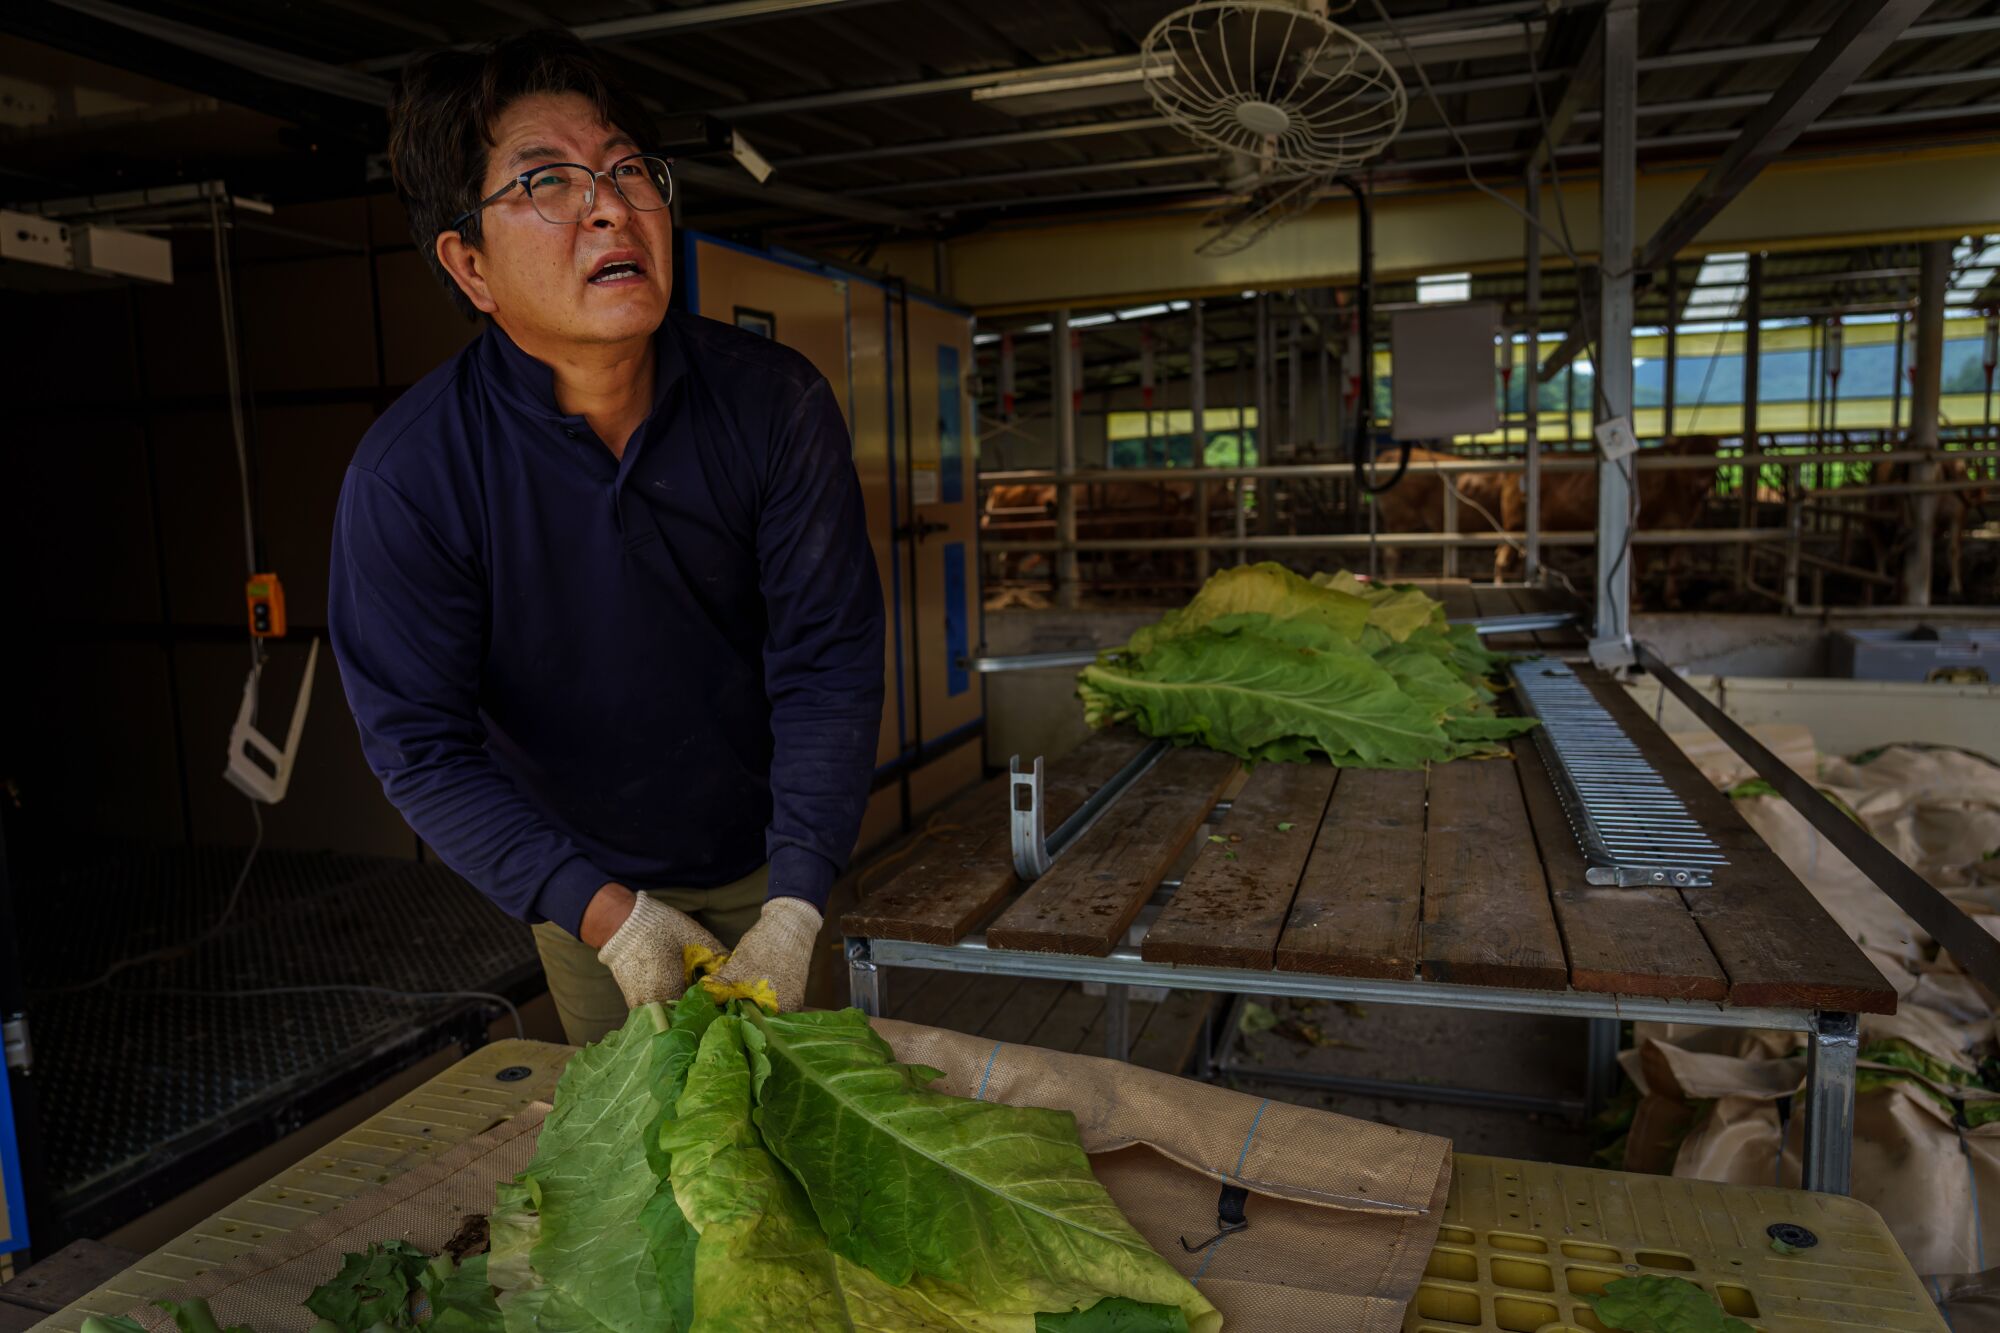 Park Jong-bum sorts tobacco leaves before hanging them up for drying at his farm.